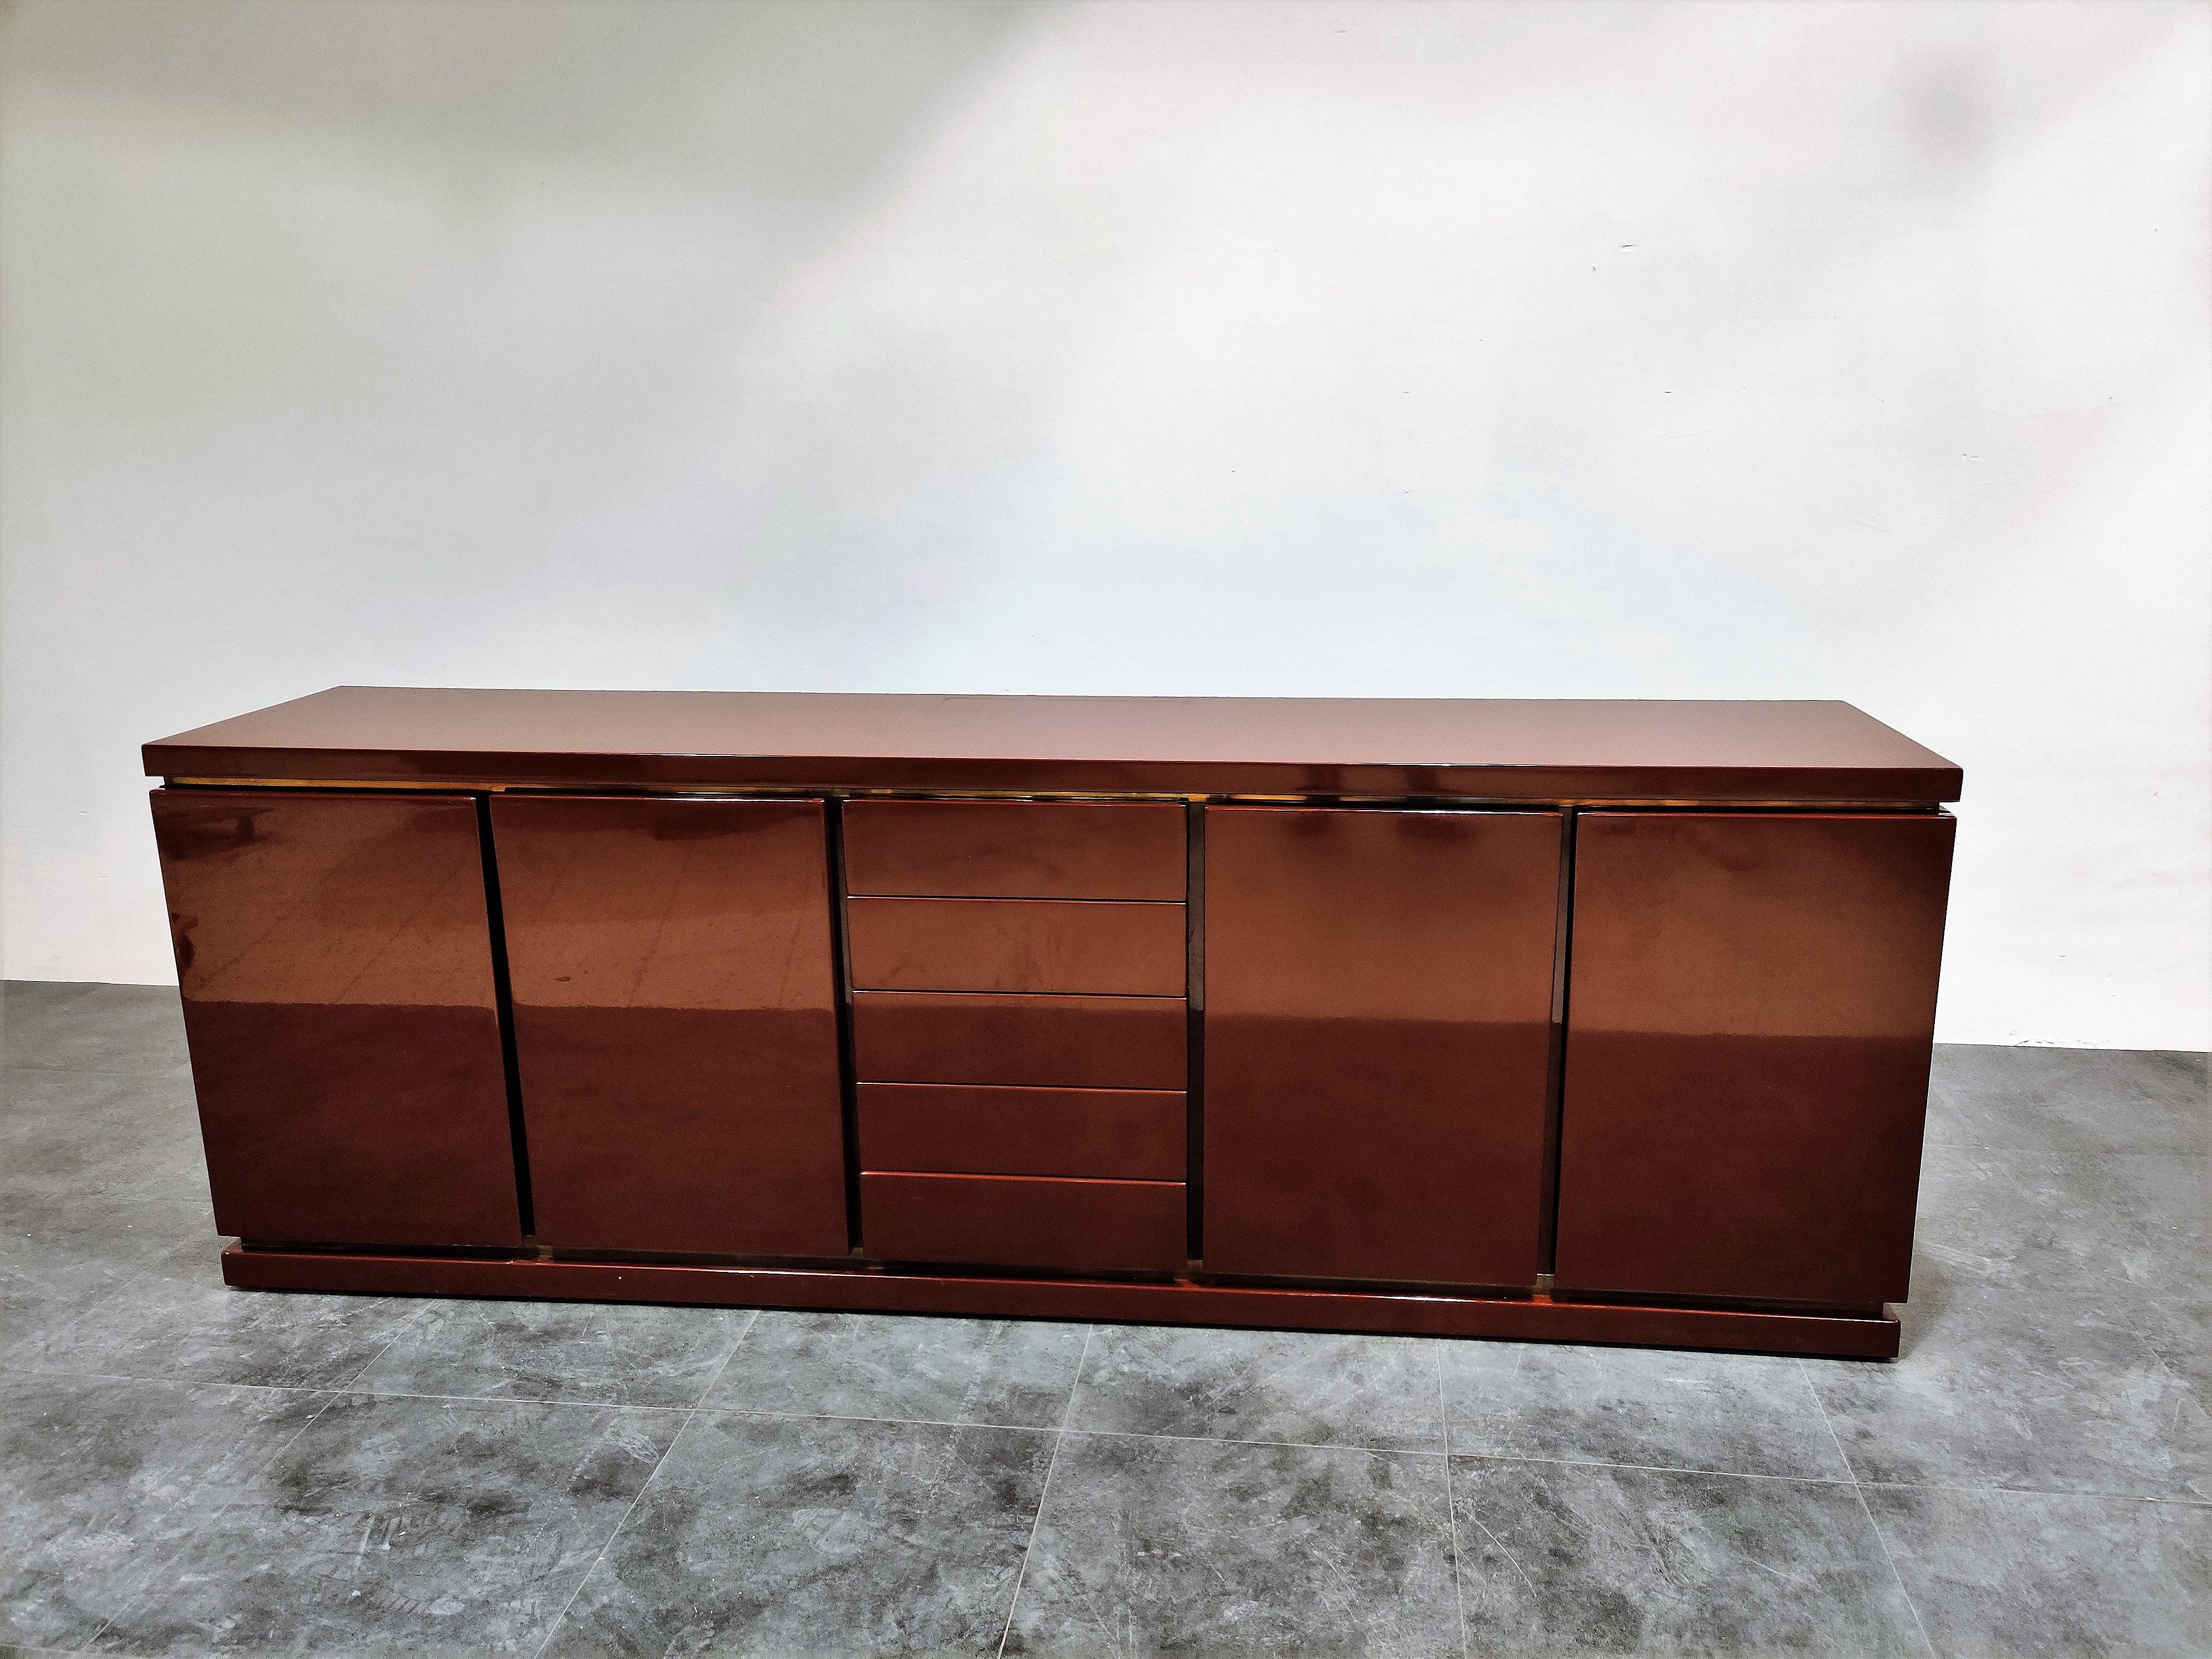 Very rare red lacquered credenza by Jean Charles. 

It features 4 doors and 5 central drawers.

The credenza is made of high quality materials and has a great 1970s-1980s glamourous look.

It screams 'luxury' and blends in well with other